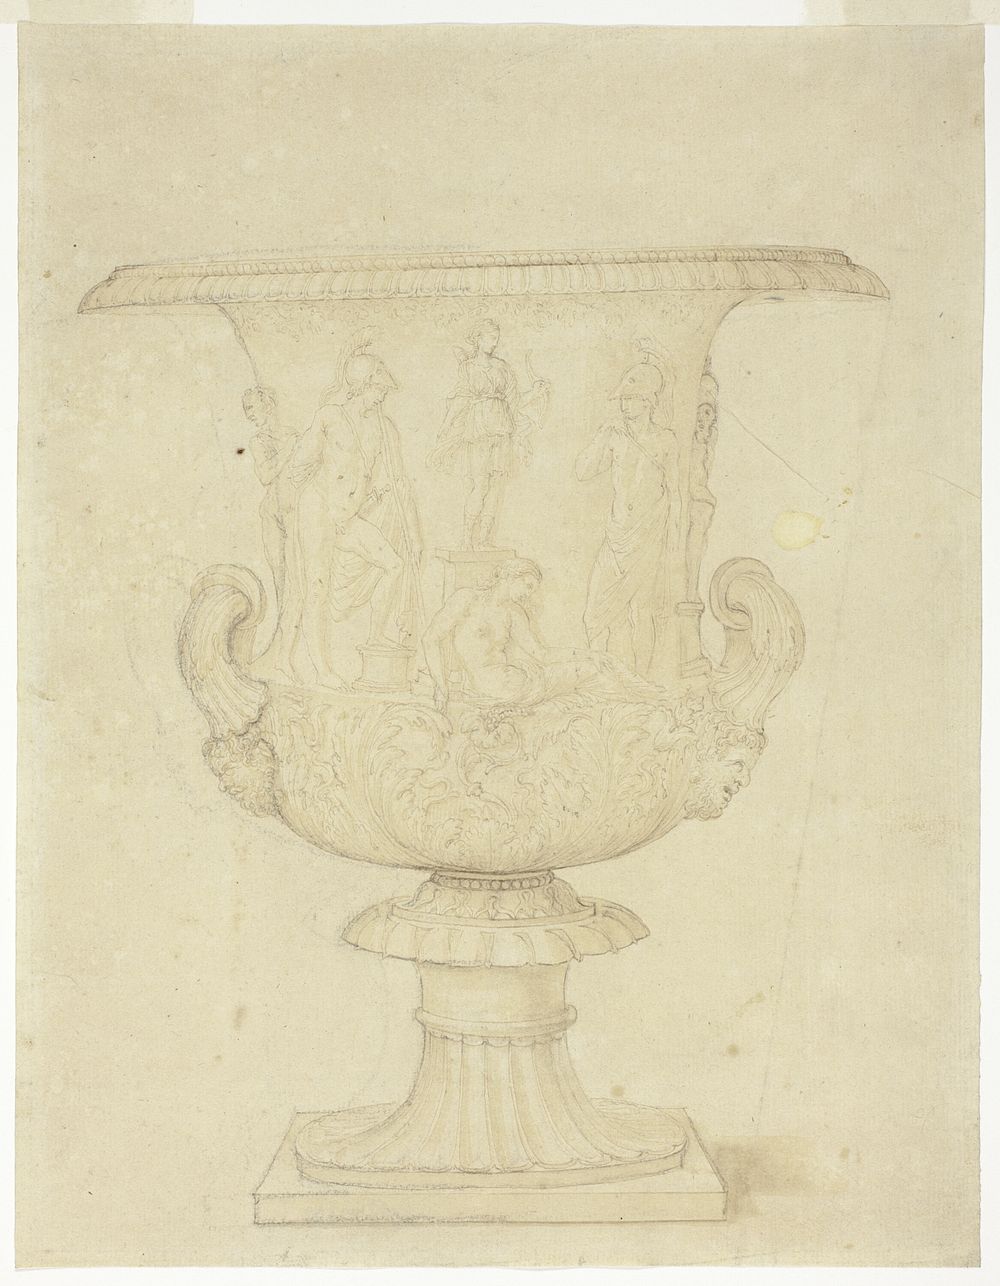 The Medici Vase by Unknown artist